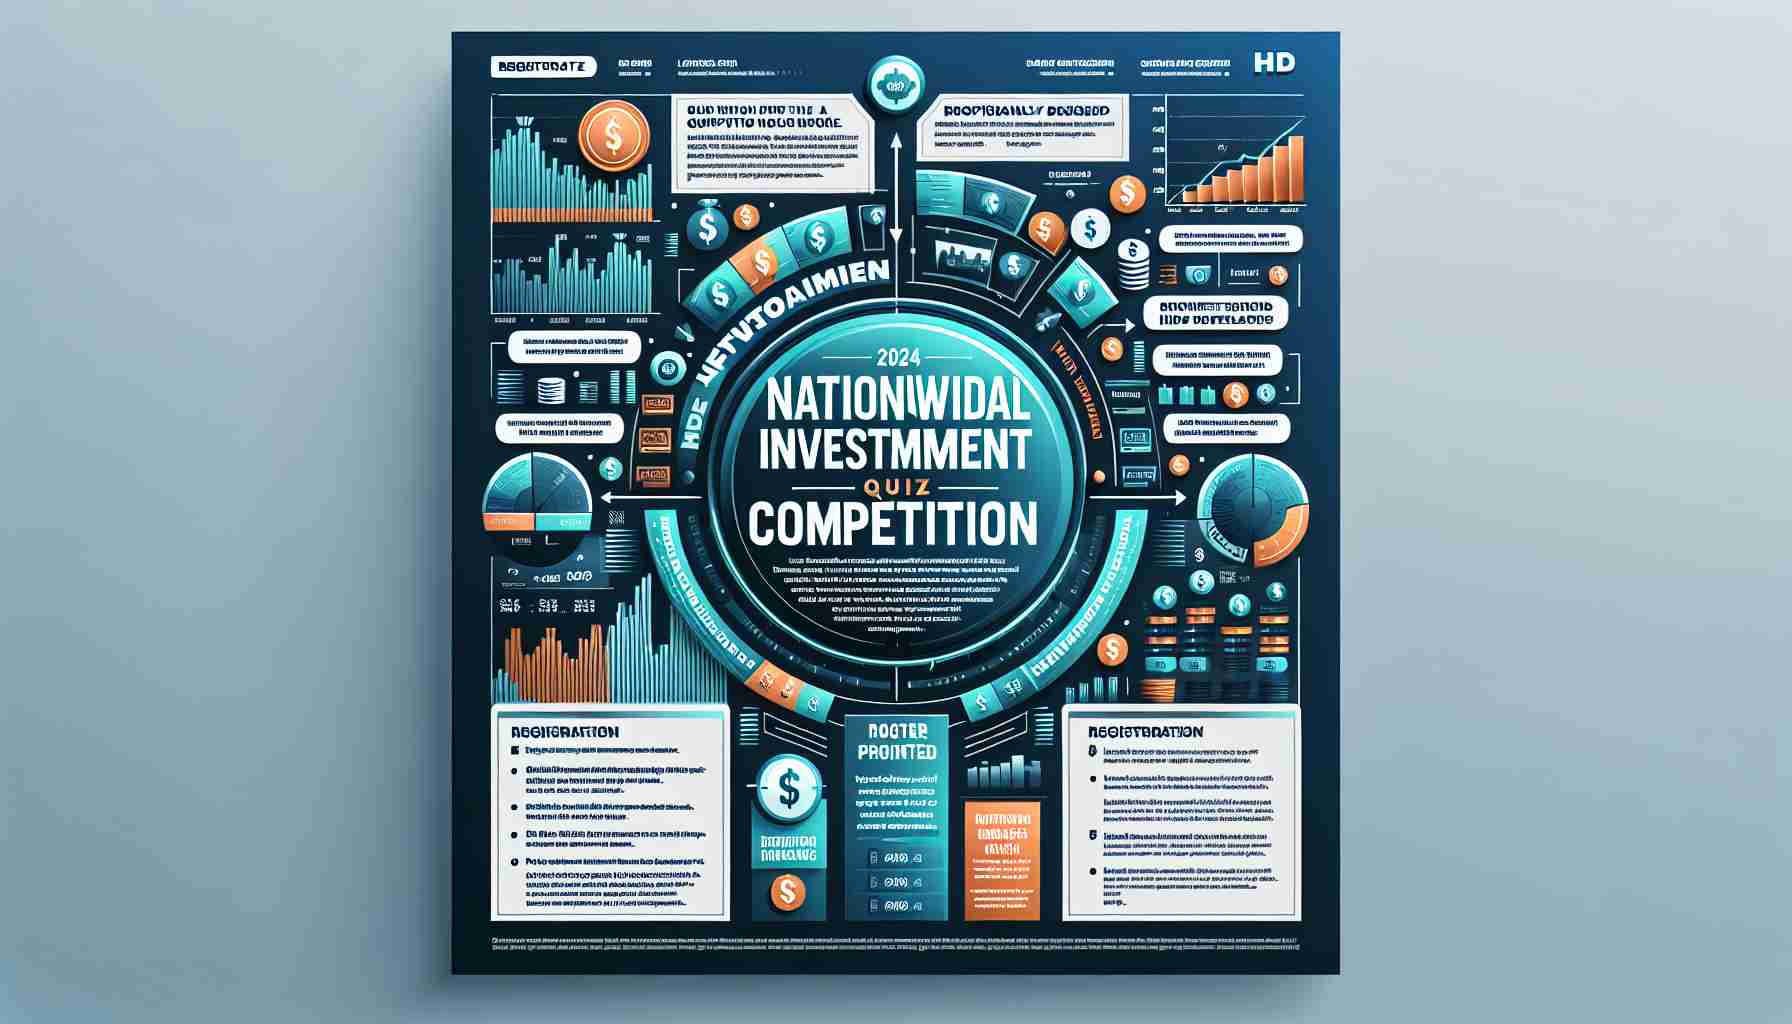 2024 Nationwide Investment Quiz Competition: Registration and Rules Overview